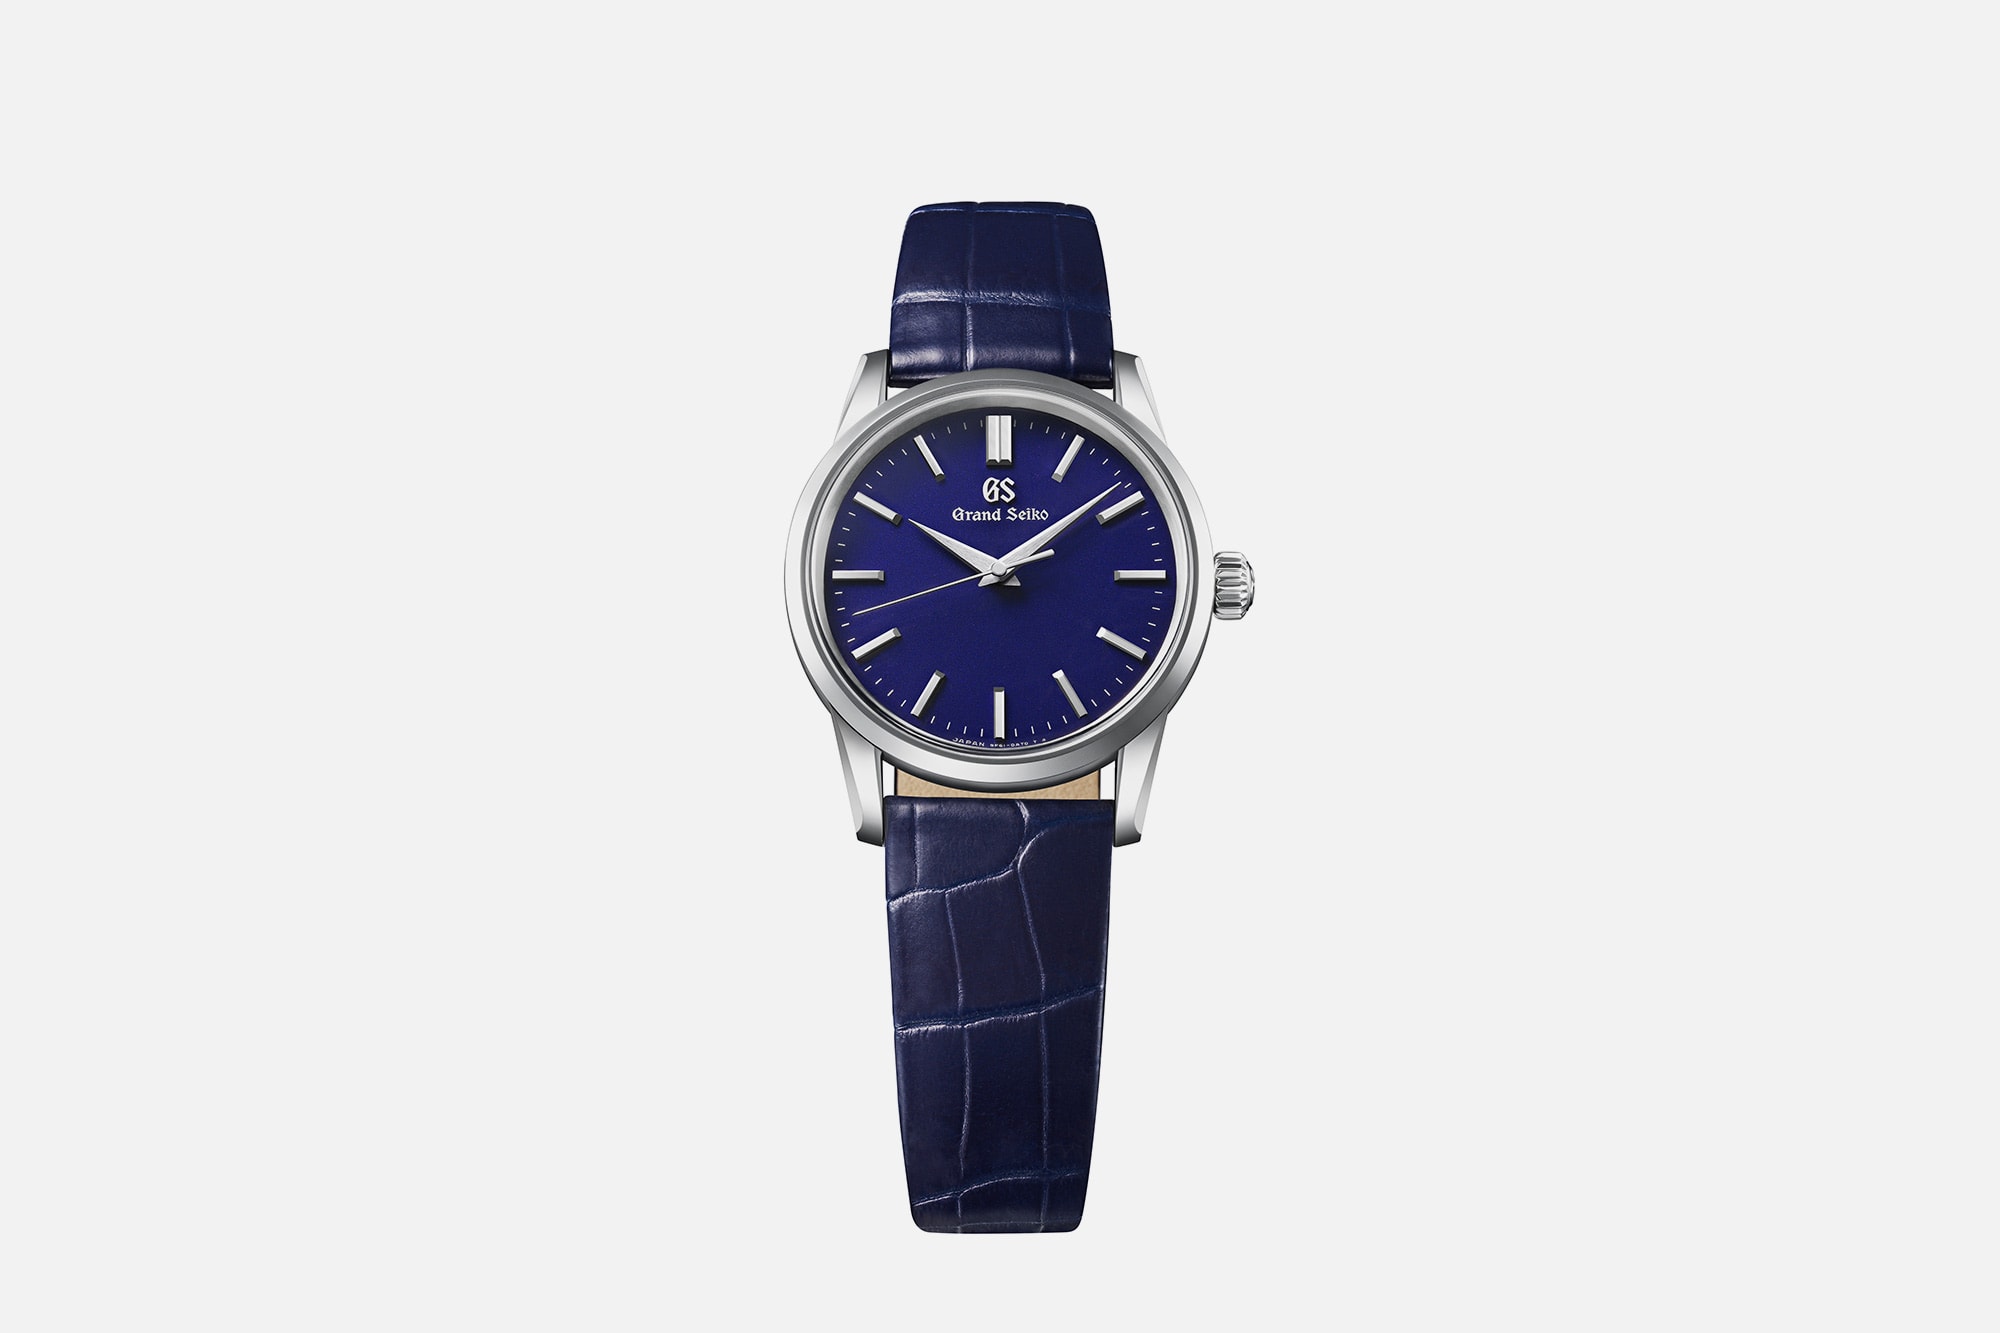 Grand Seiko Adds New, Smaller, Dress Watches to their Elegance Collection